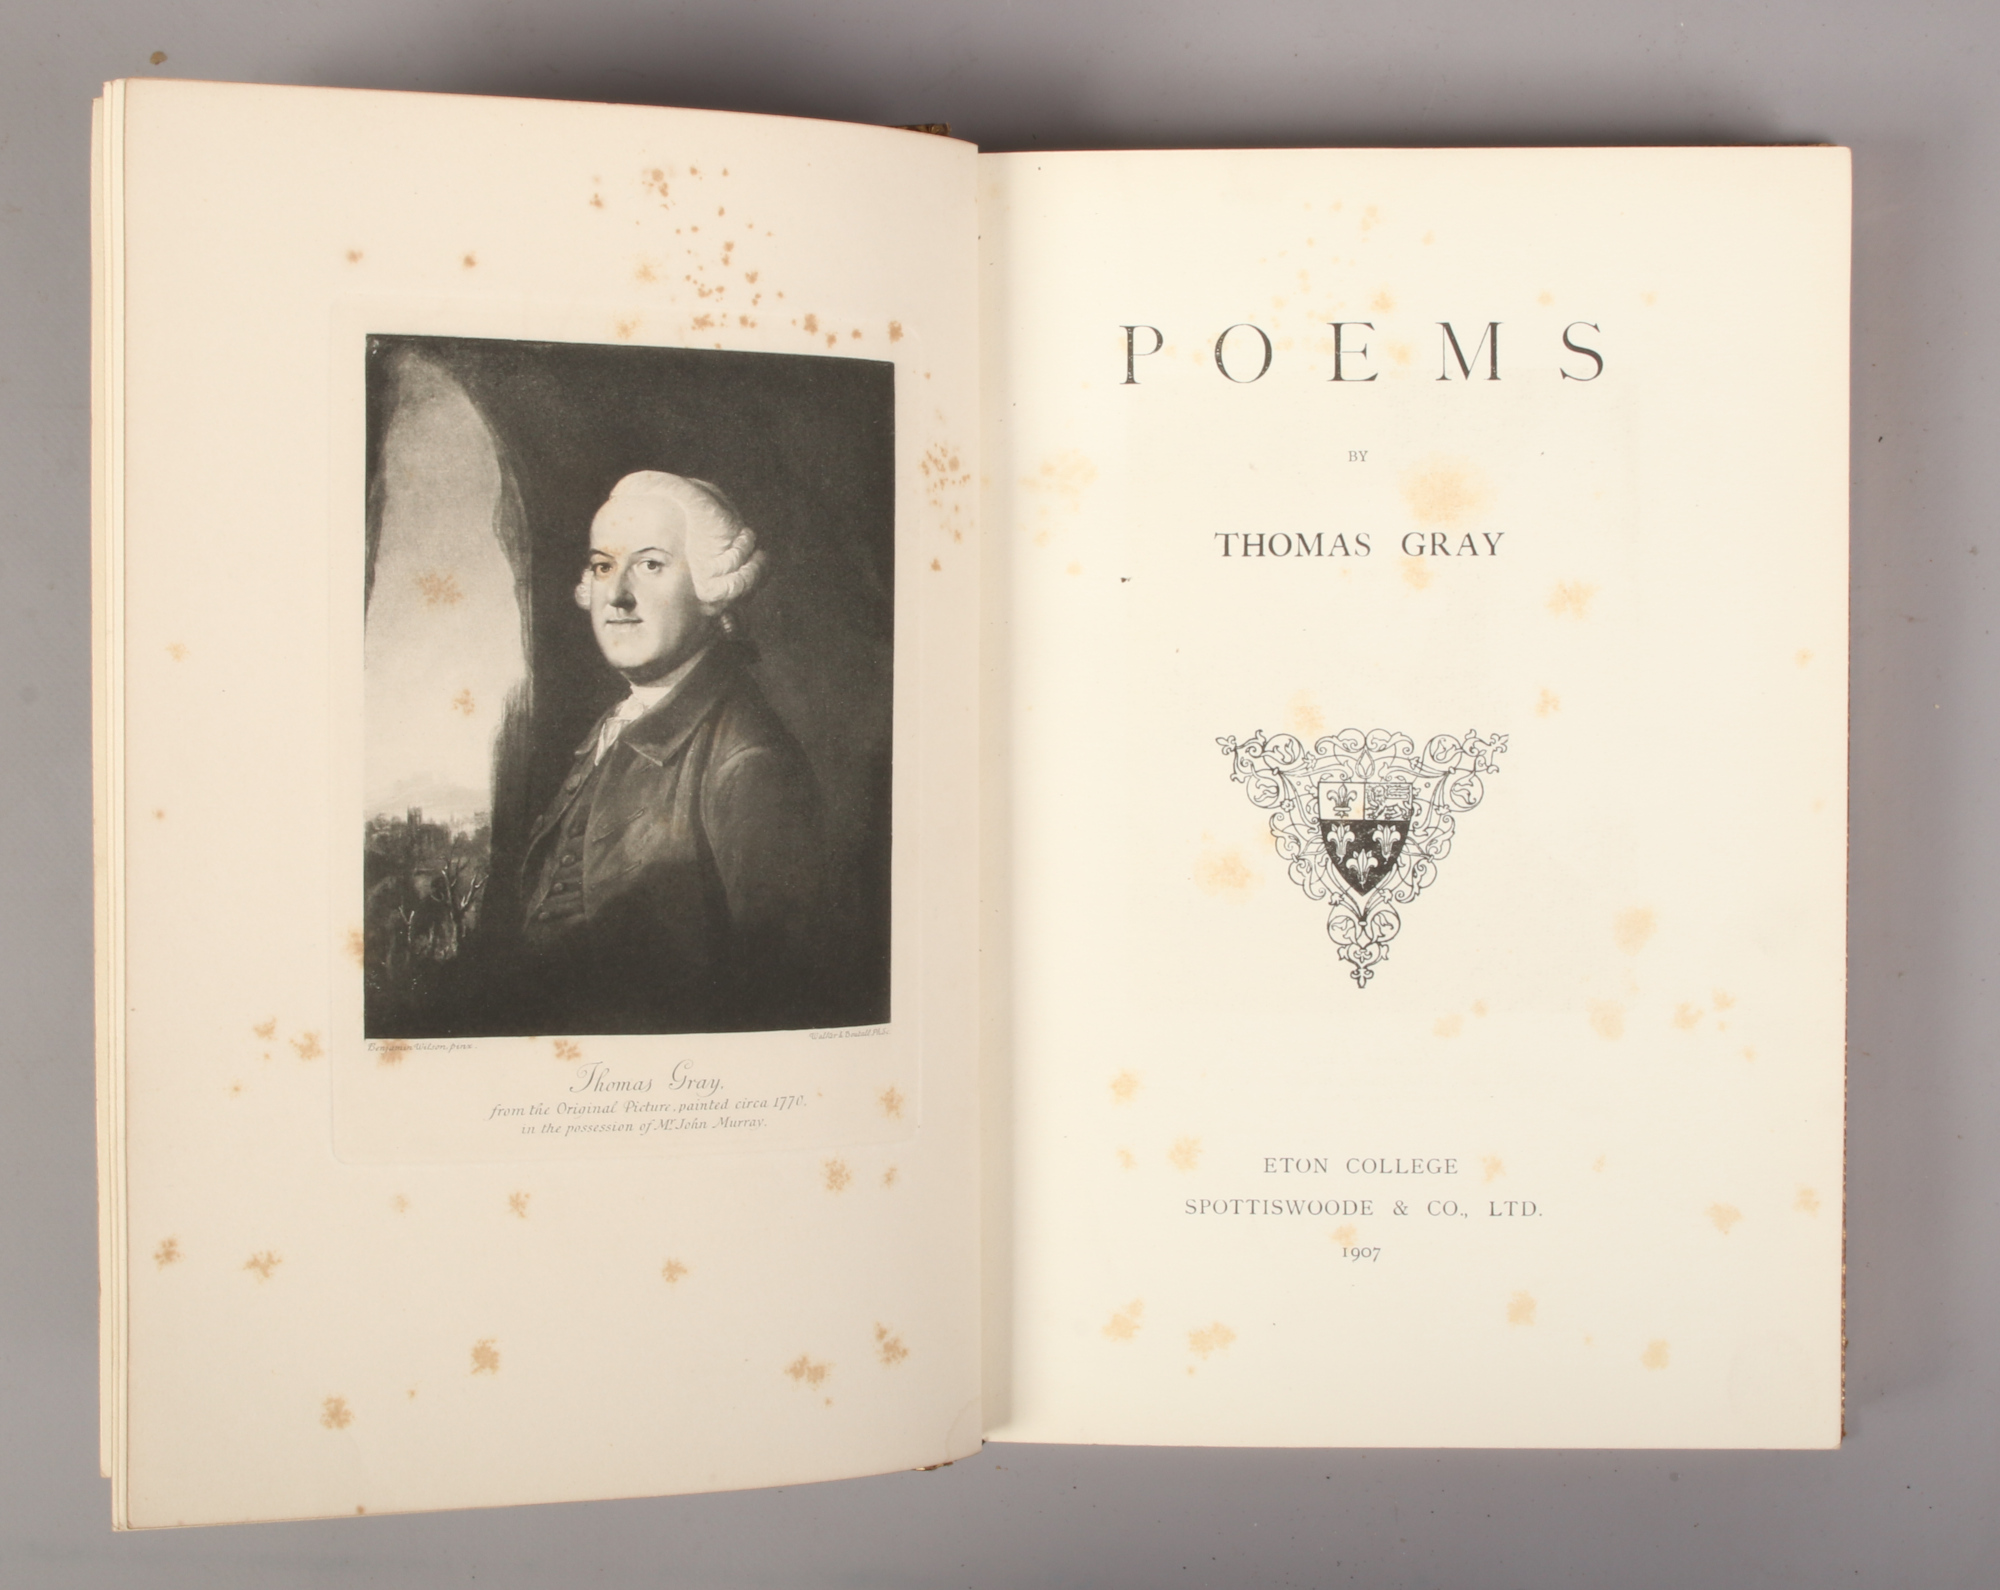 Poems of Thomas Gray leather bound edition Eton College, Spottiswoode & Co 1907. Book plate for - Image 2 of 2